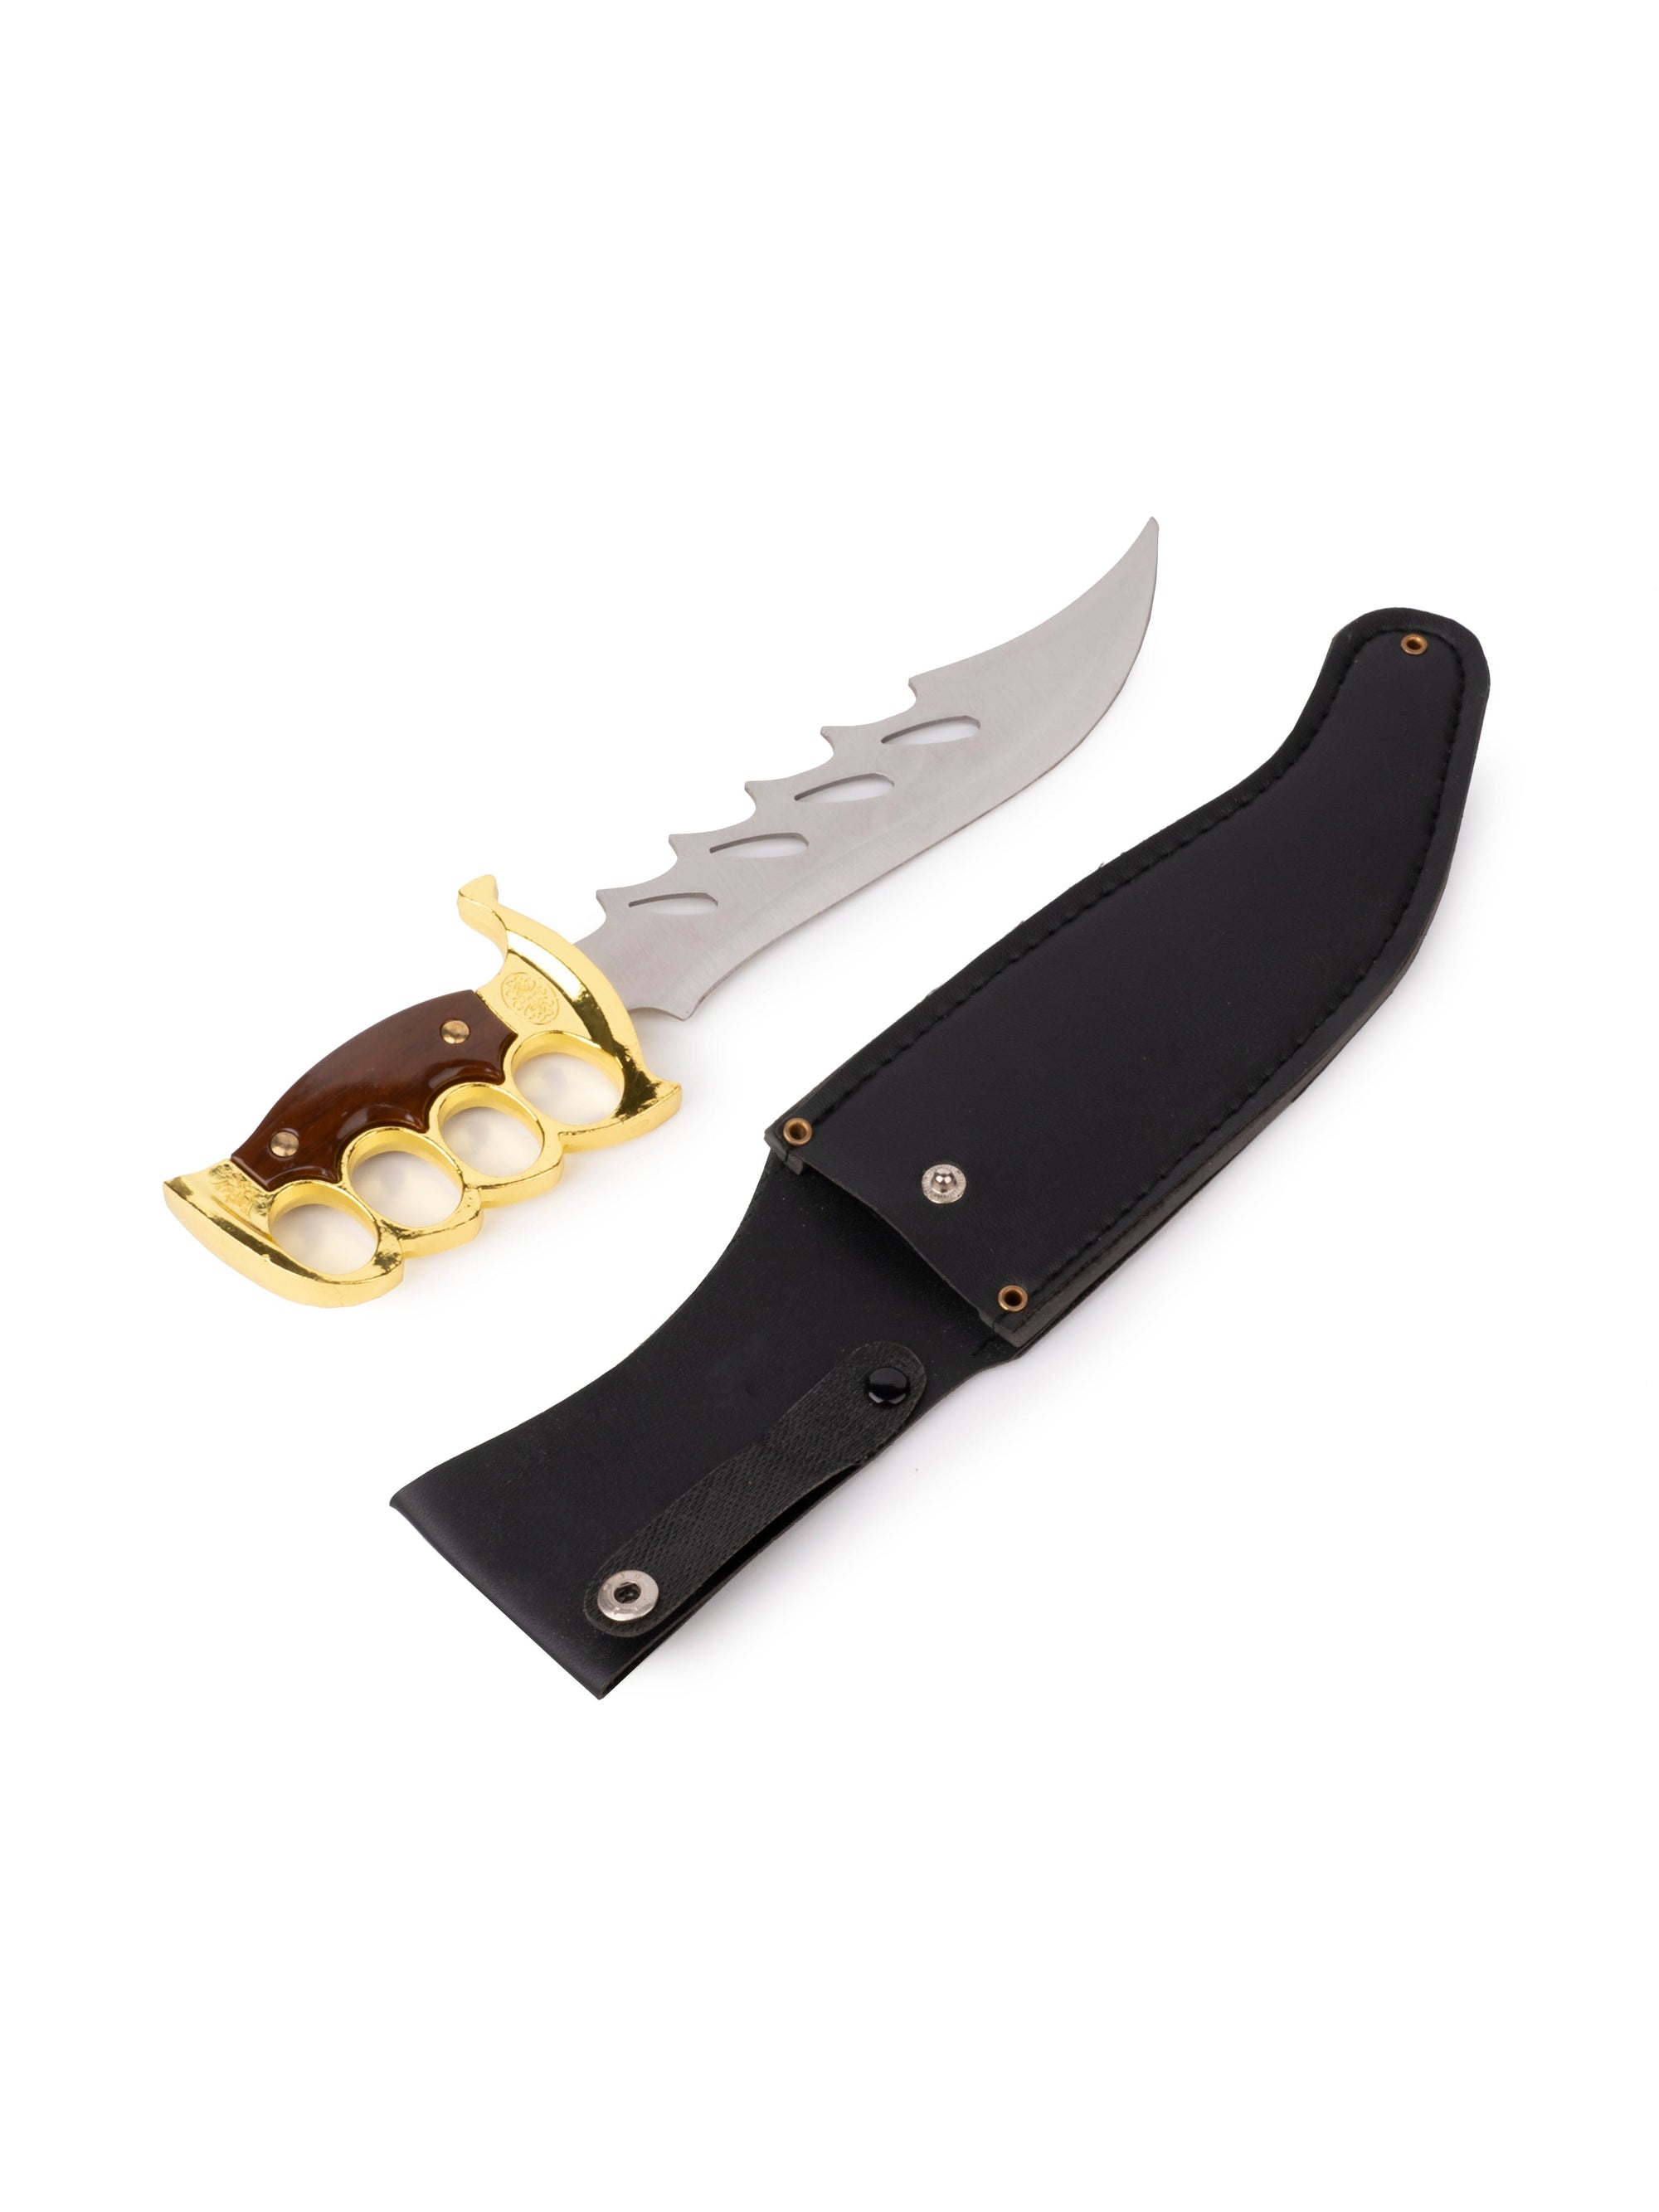 12" Hunting Knife / Dagger in a Black Leather Case with Golden Grip Handle for Home Decor